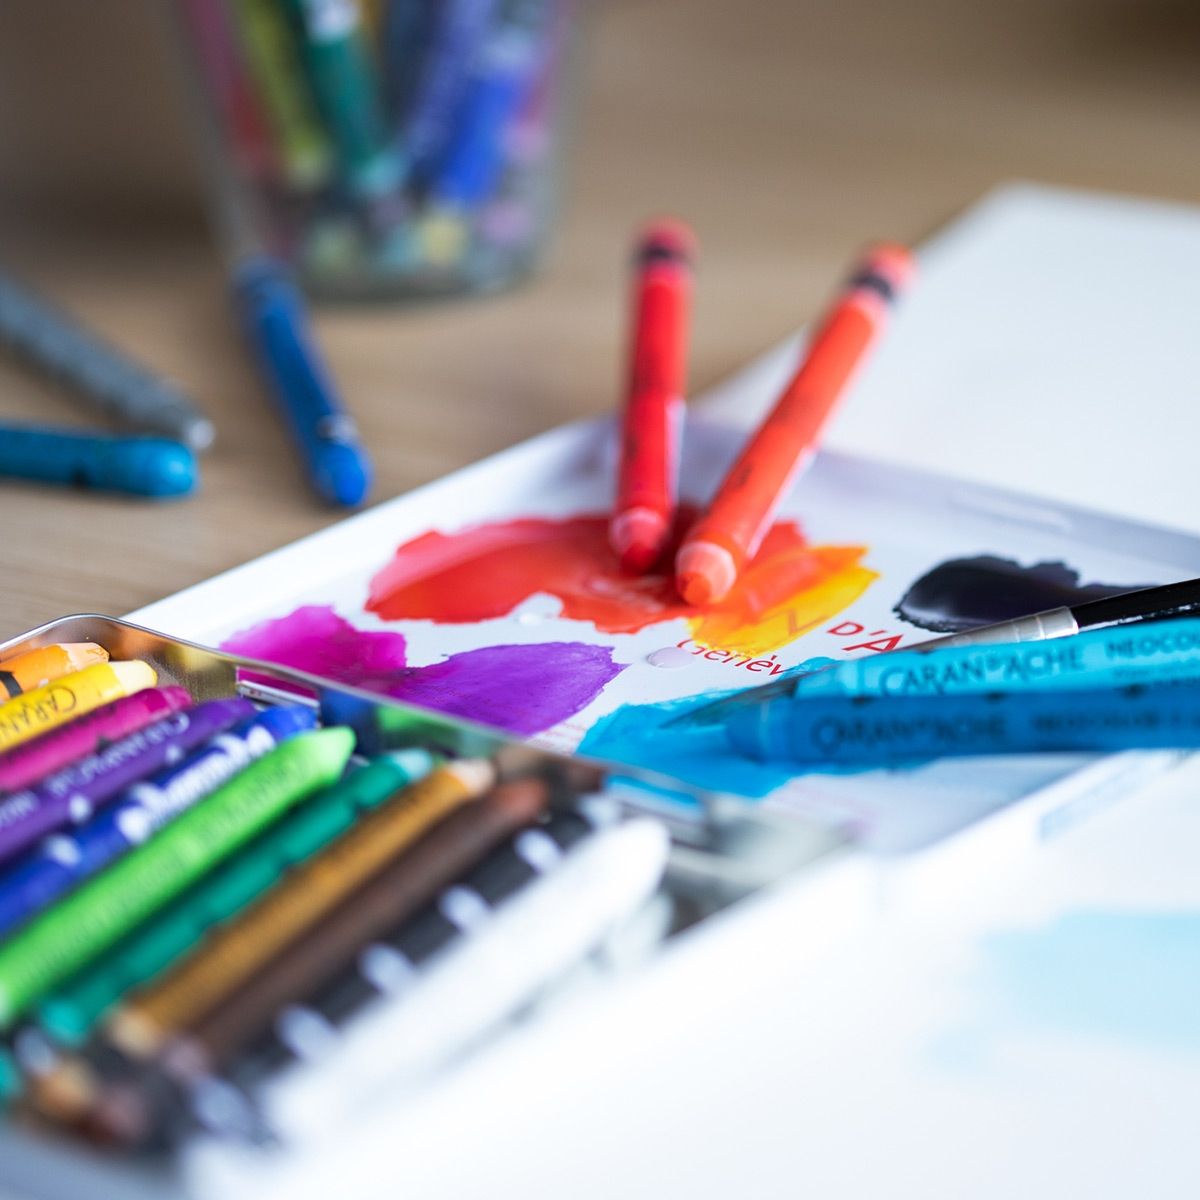 Wax Pastels have ultra-high pigment concentration, superior covering power, luminous colors and excellent lightfastness